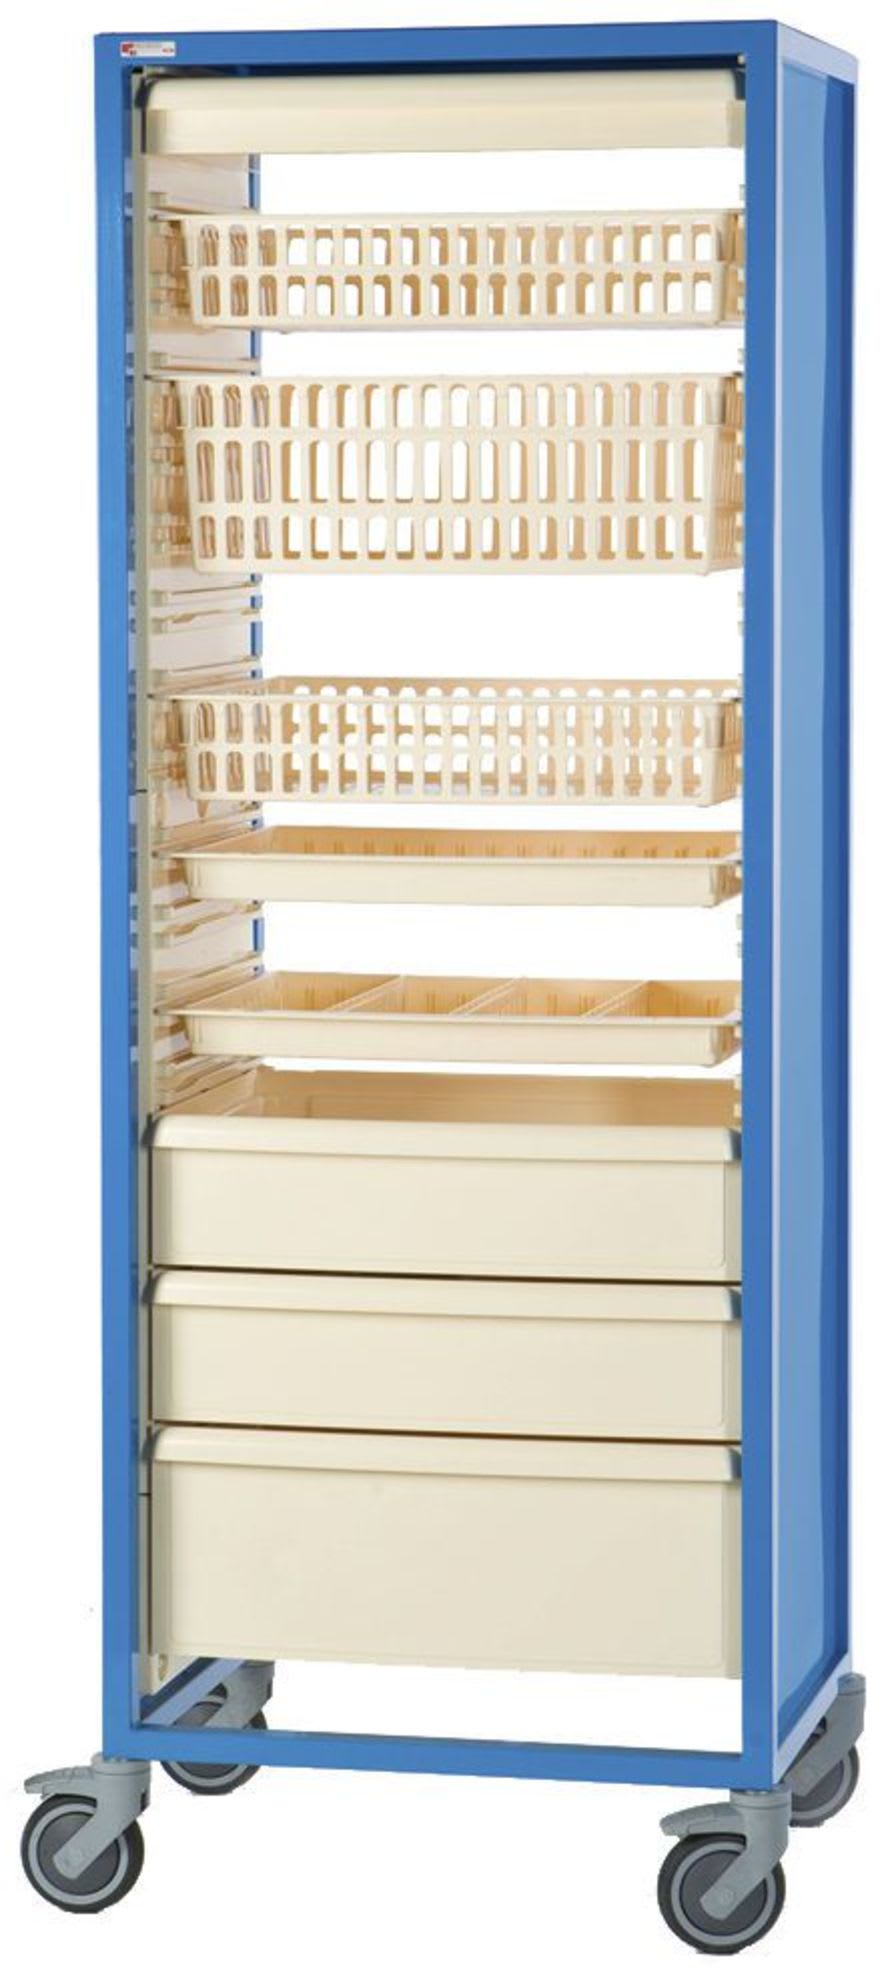 Medical cabinet / storage / for healthcare facilities / on casters LOR400, LOR 600 Allibert Medical SAS